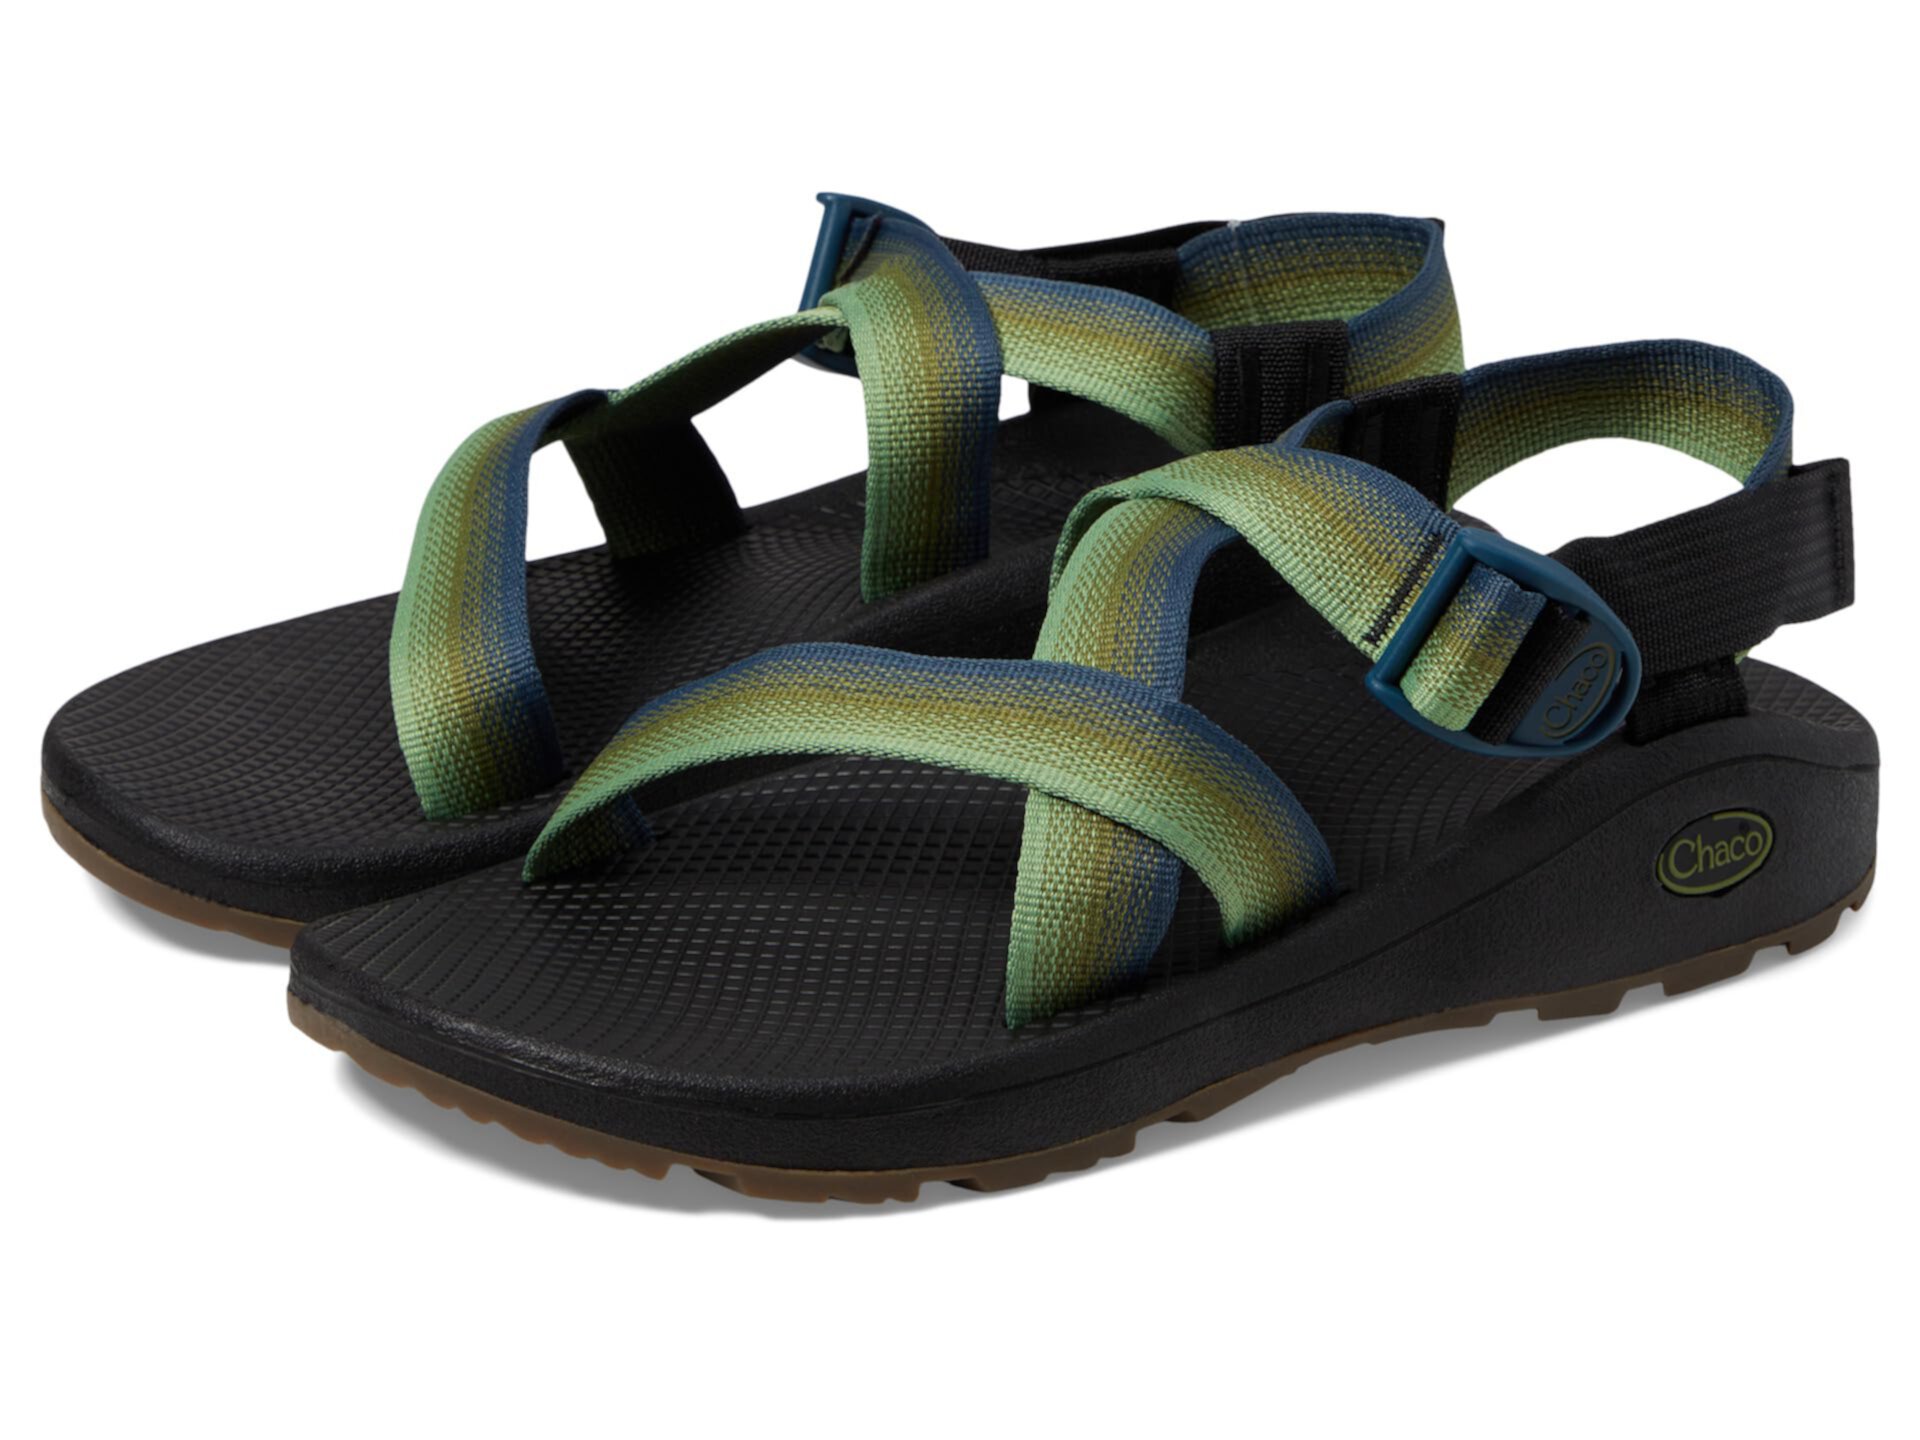 Zcloud Chaco